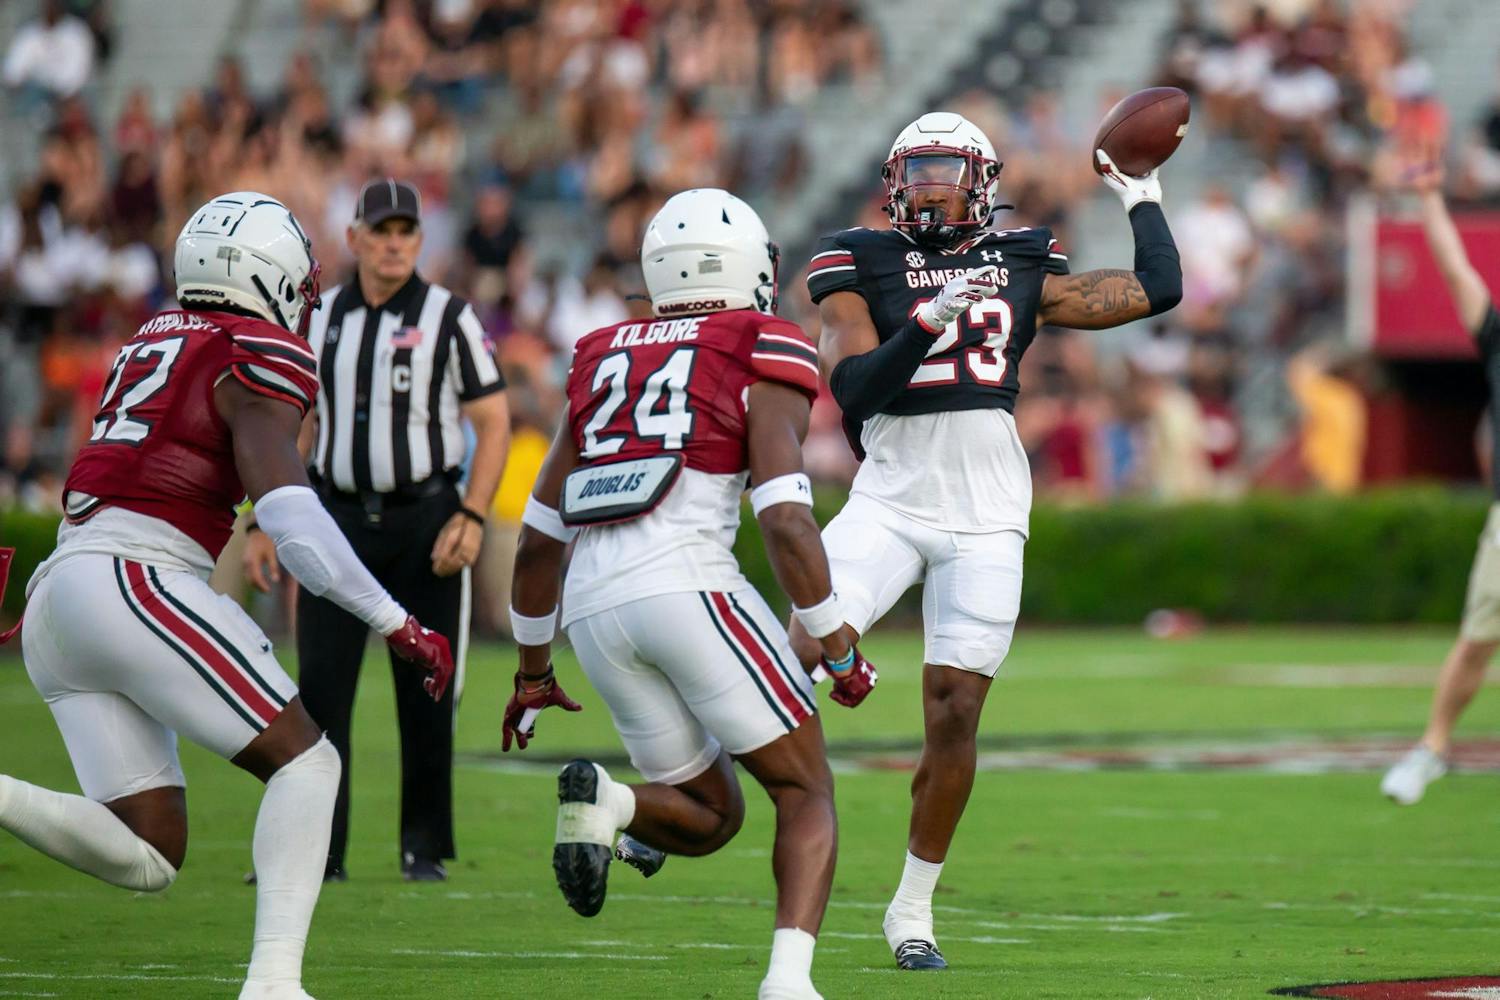 Redshirt sophomore defensive back Gerald Kilgore looks for the open pass downfield during the 2024 Garnet &amp; Black Spring Game at Williams-Brice Stadium on April 20, 2024. The 2024 season will be Kilgore’s first with the ɫɫƵs after he played two seasons at Tennessee Tech.